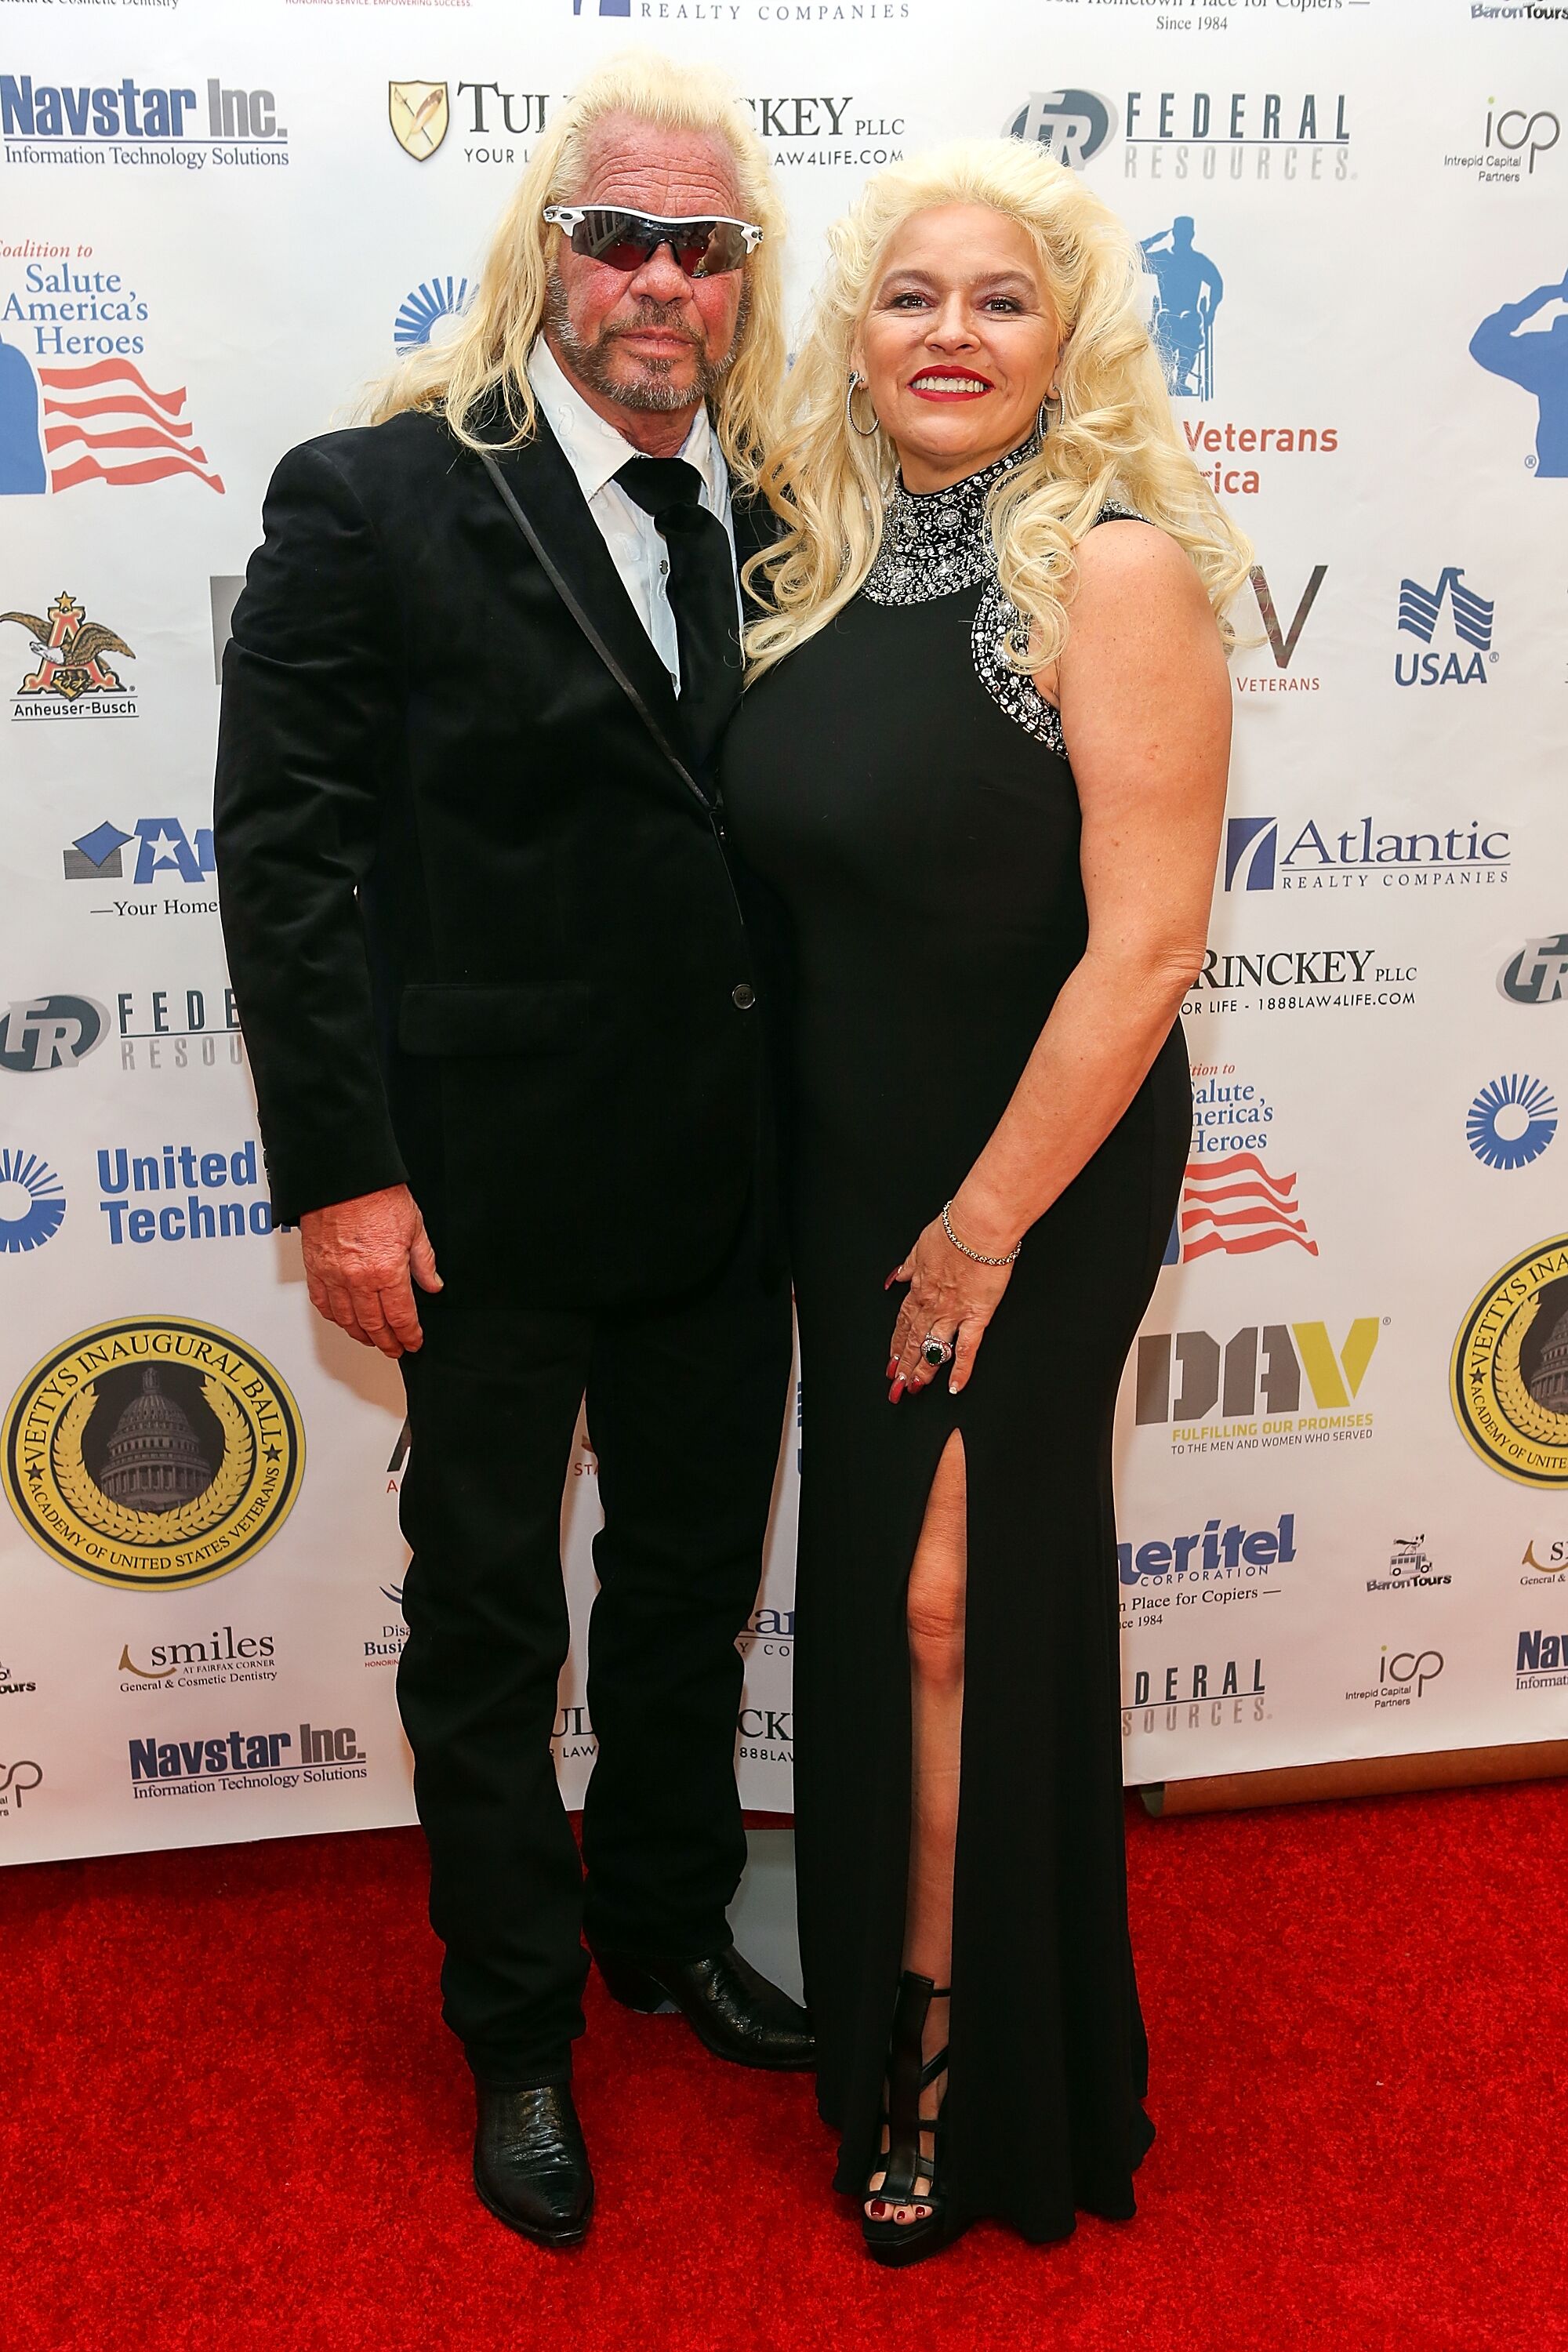 Duane 'Dog the Bounty Hunter" Chapman (L) and Beth Chapman attend the Vettys Presidential Inaugural Ball at Hay-Adams Hotel on January 20, 2017 | Photo: Getty Images